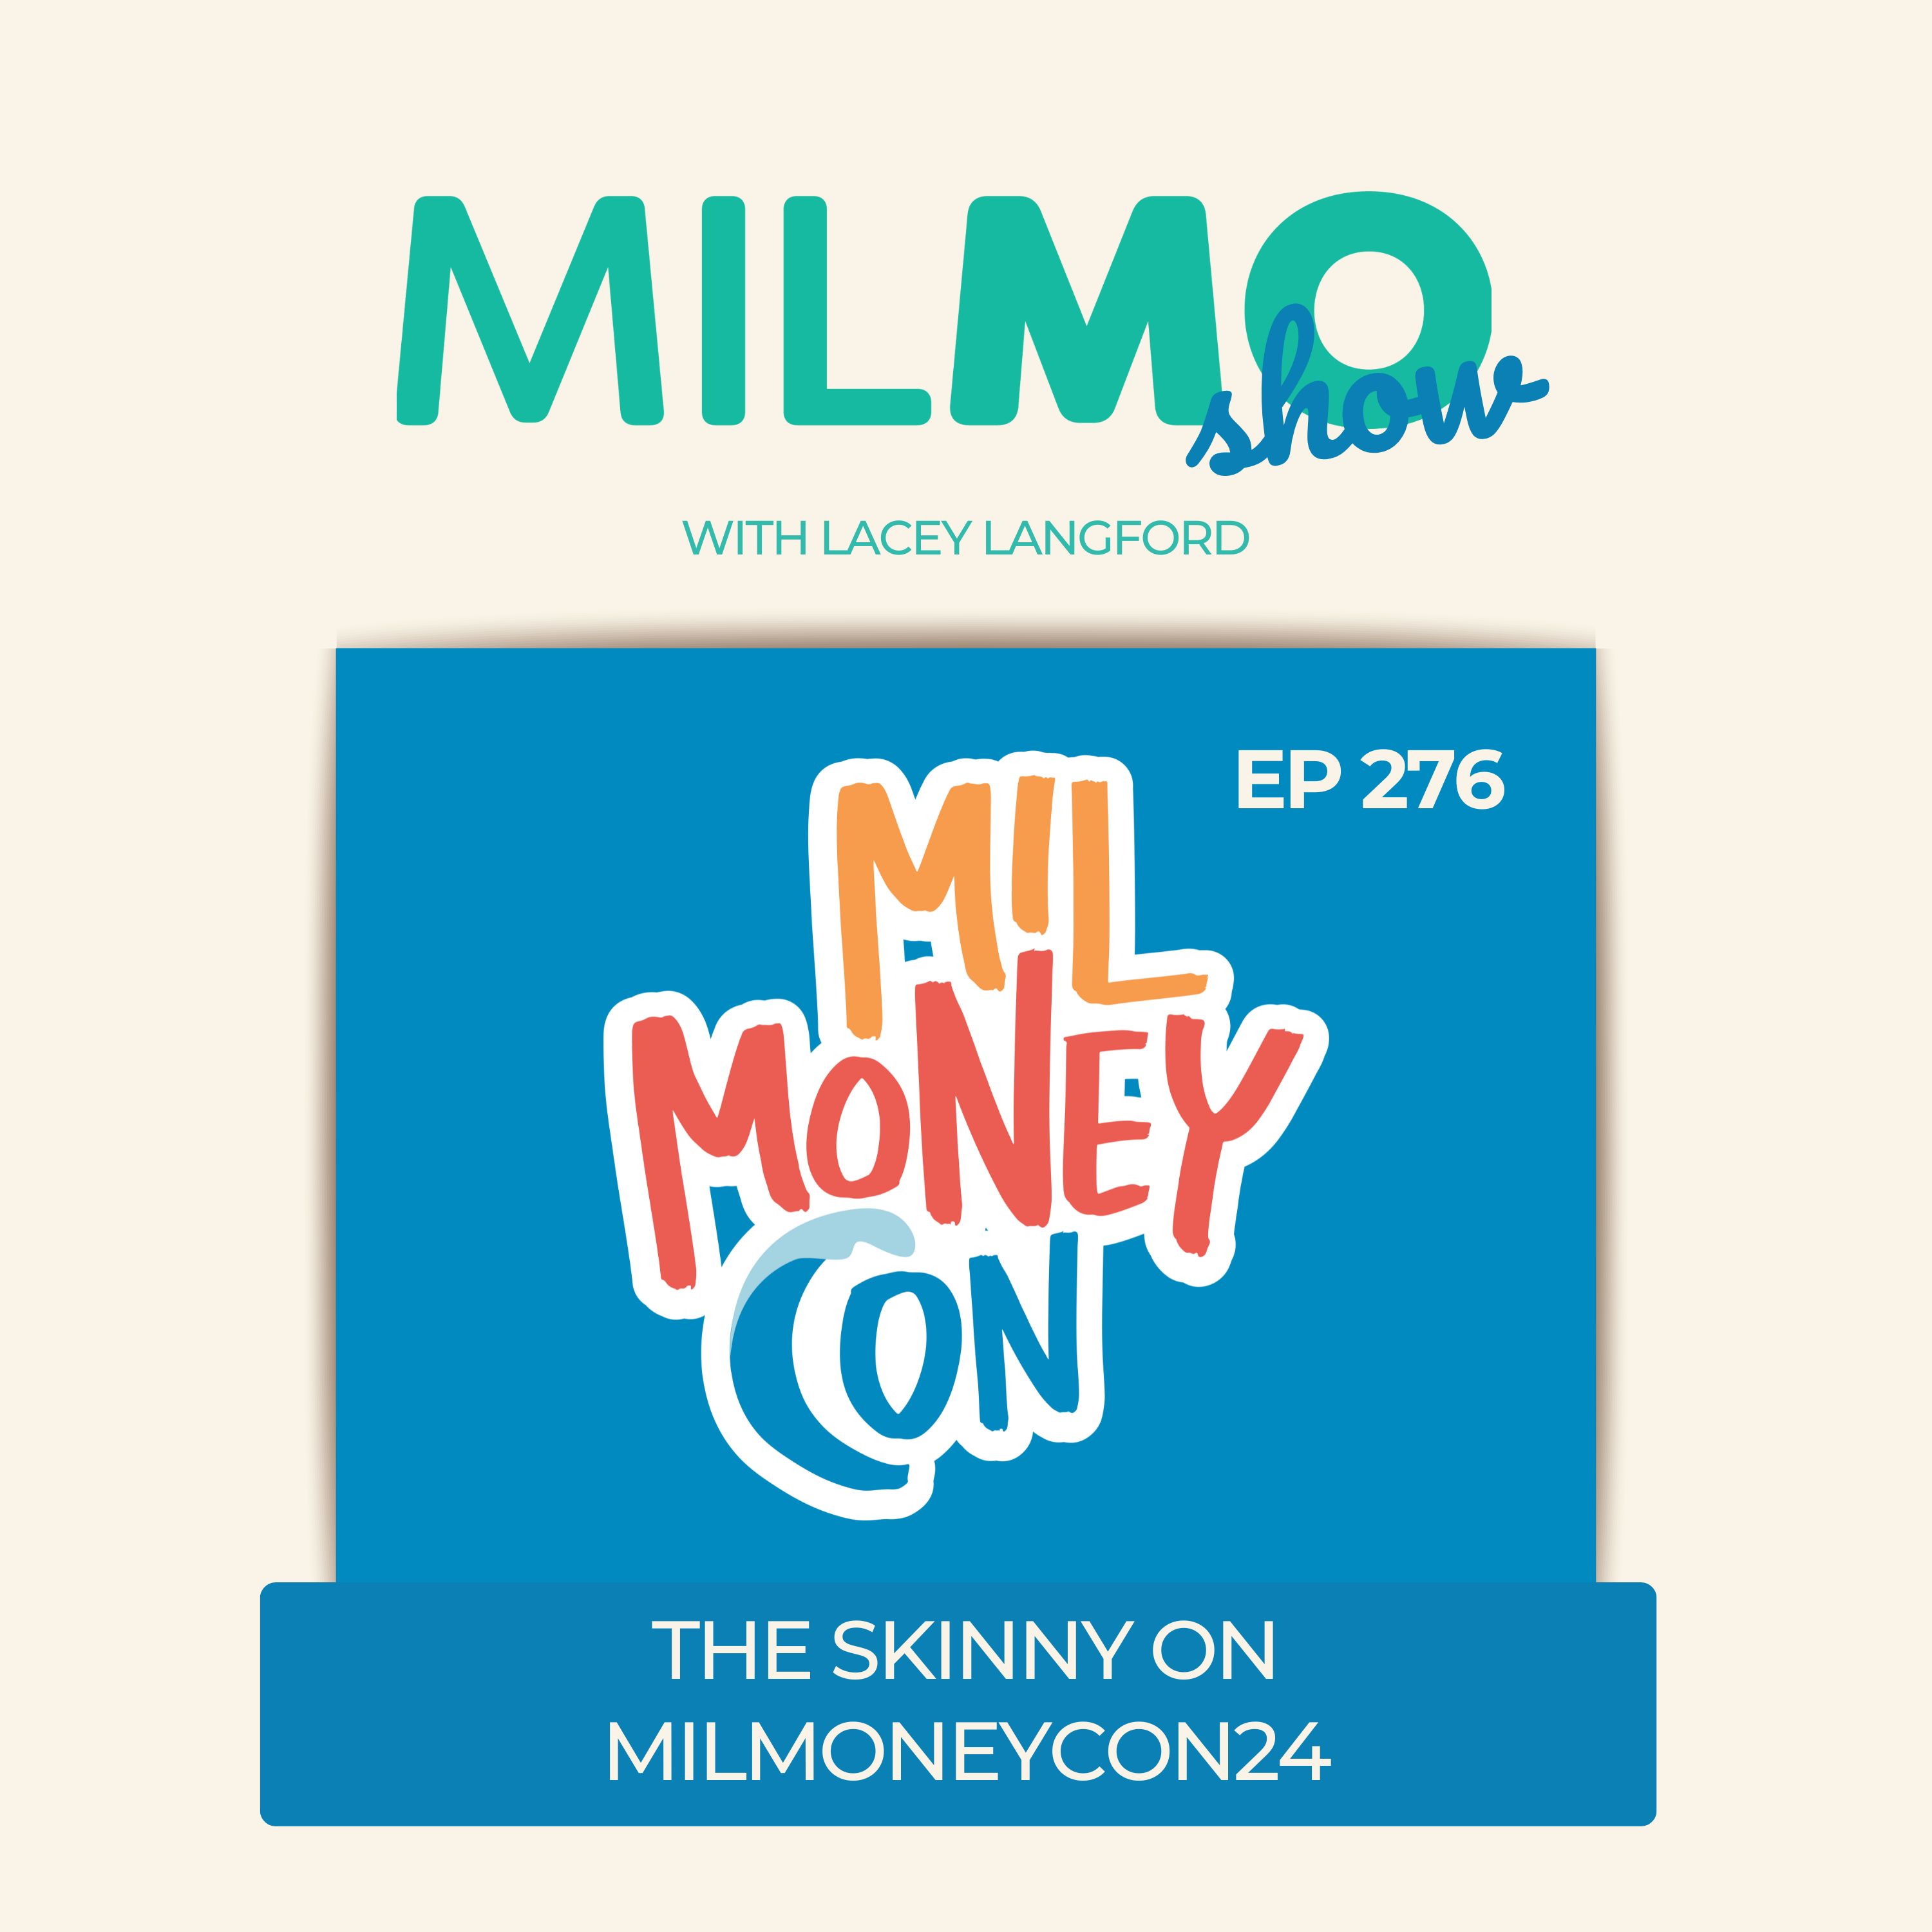 I'm excited to give you the skinny on MilMoneyCon24. I'll cover the hotel, special events, and what you can expect to get out of the conference.